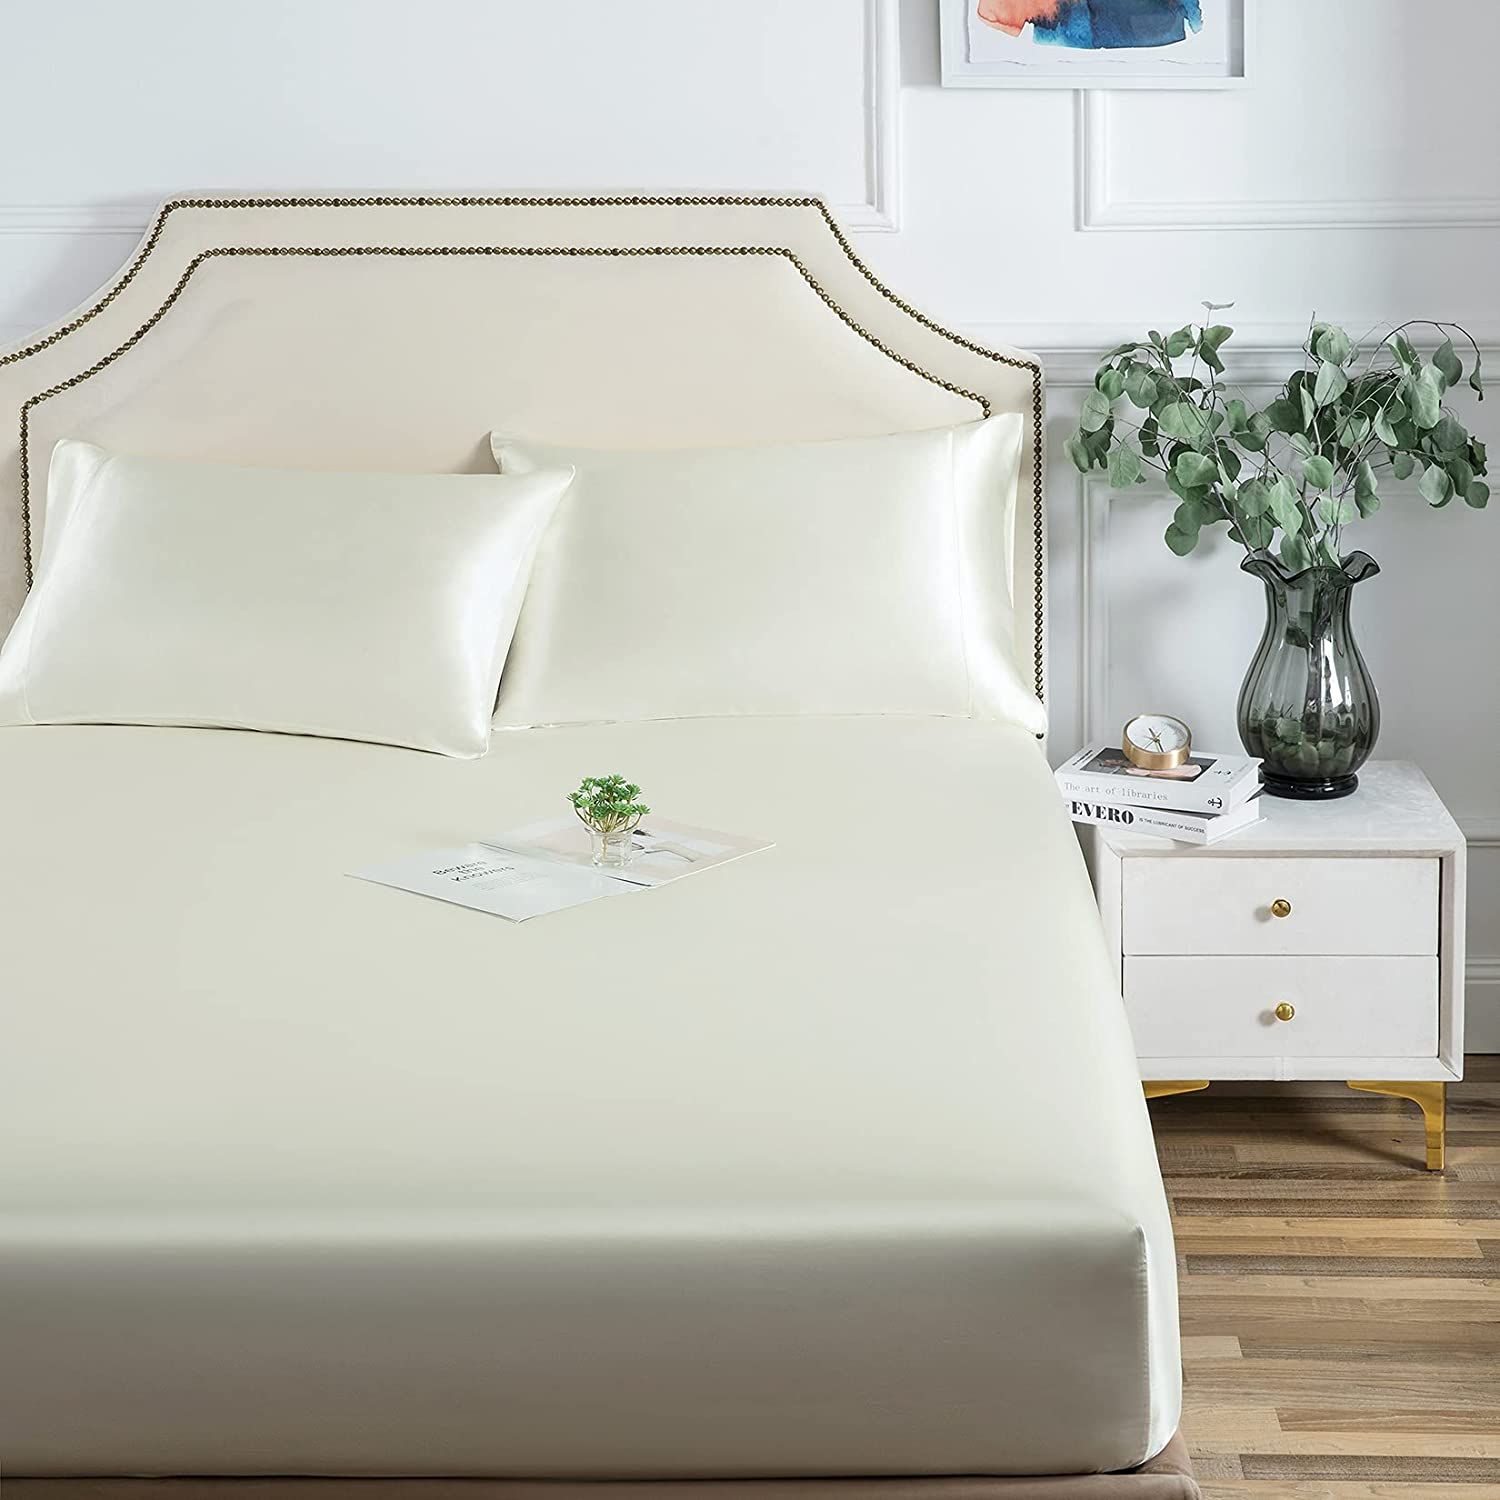 Satin Mattress Protector Non-slip Artificial Satin Silk Mattress Pad Cover Soft Wrinkle Free Fitted 